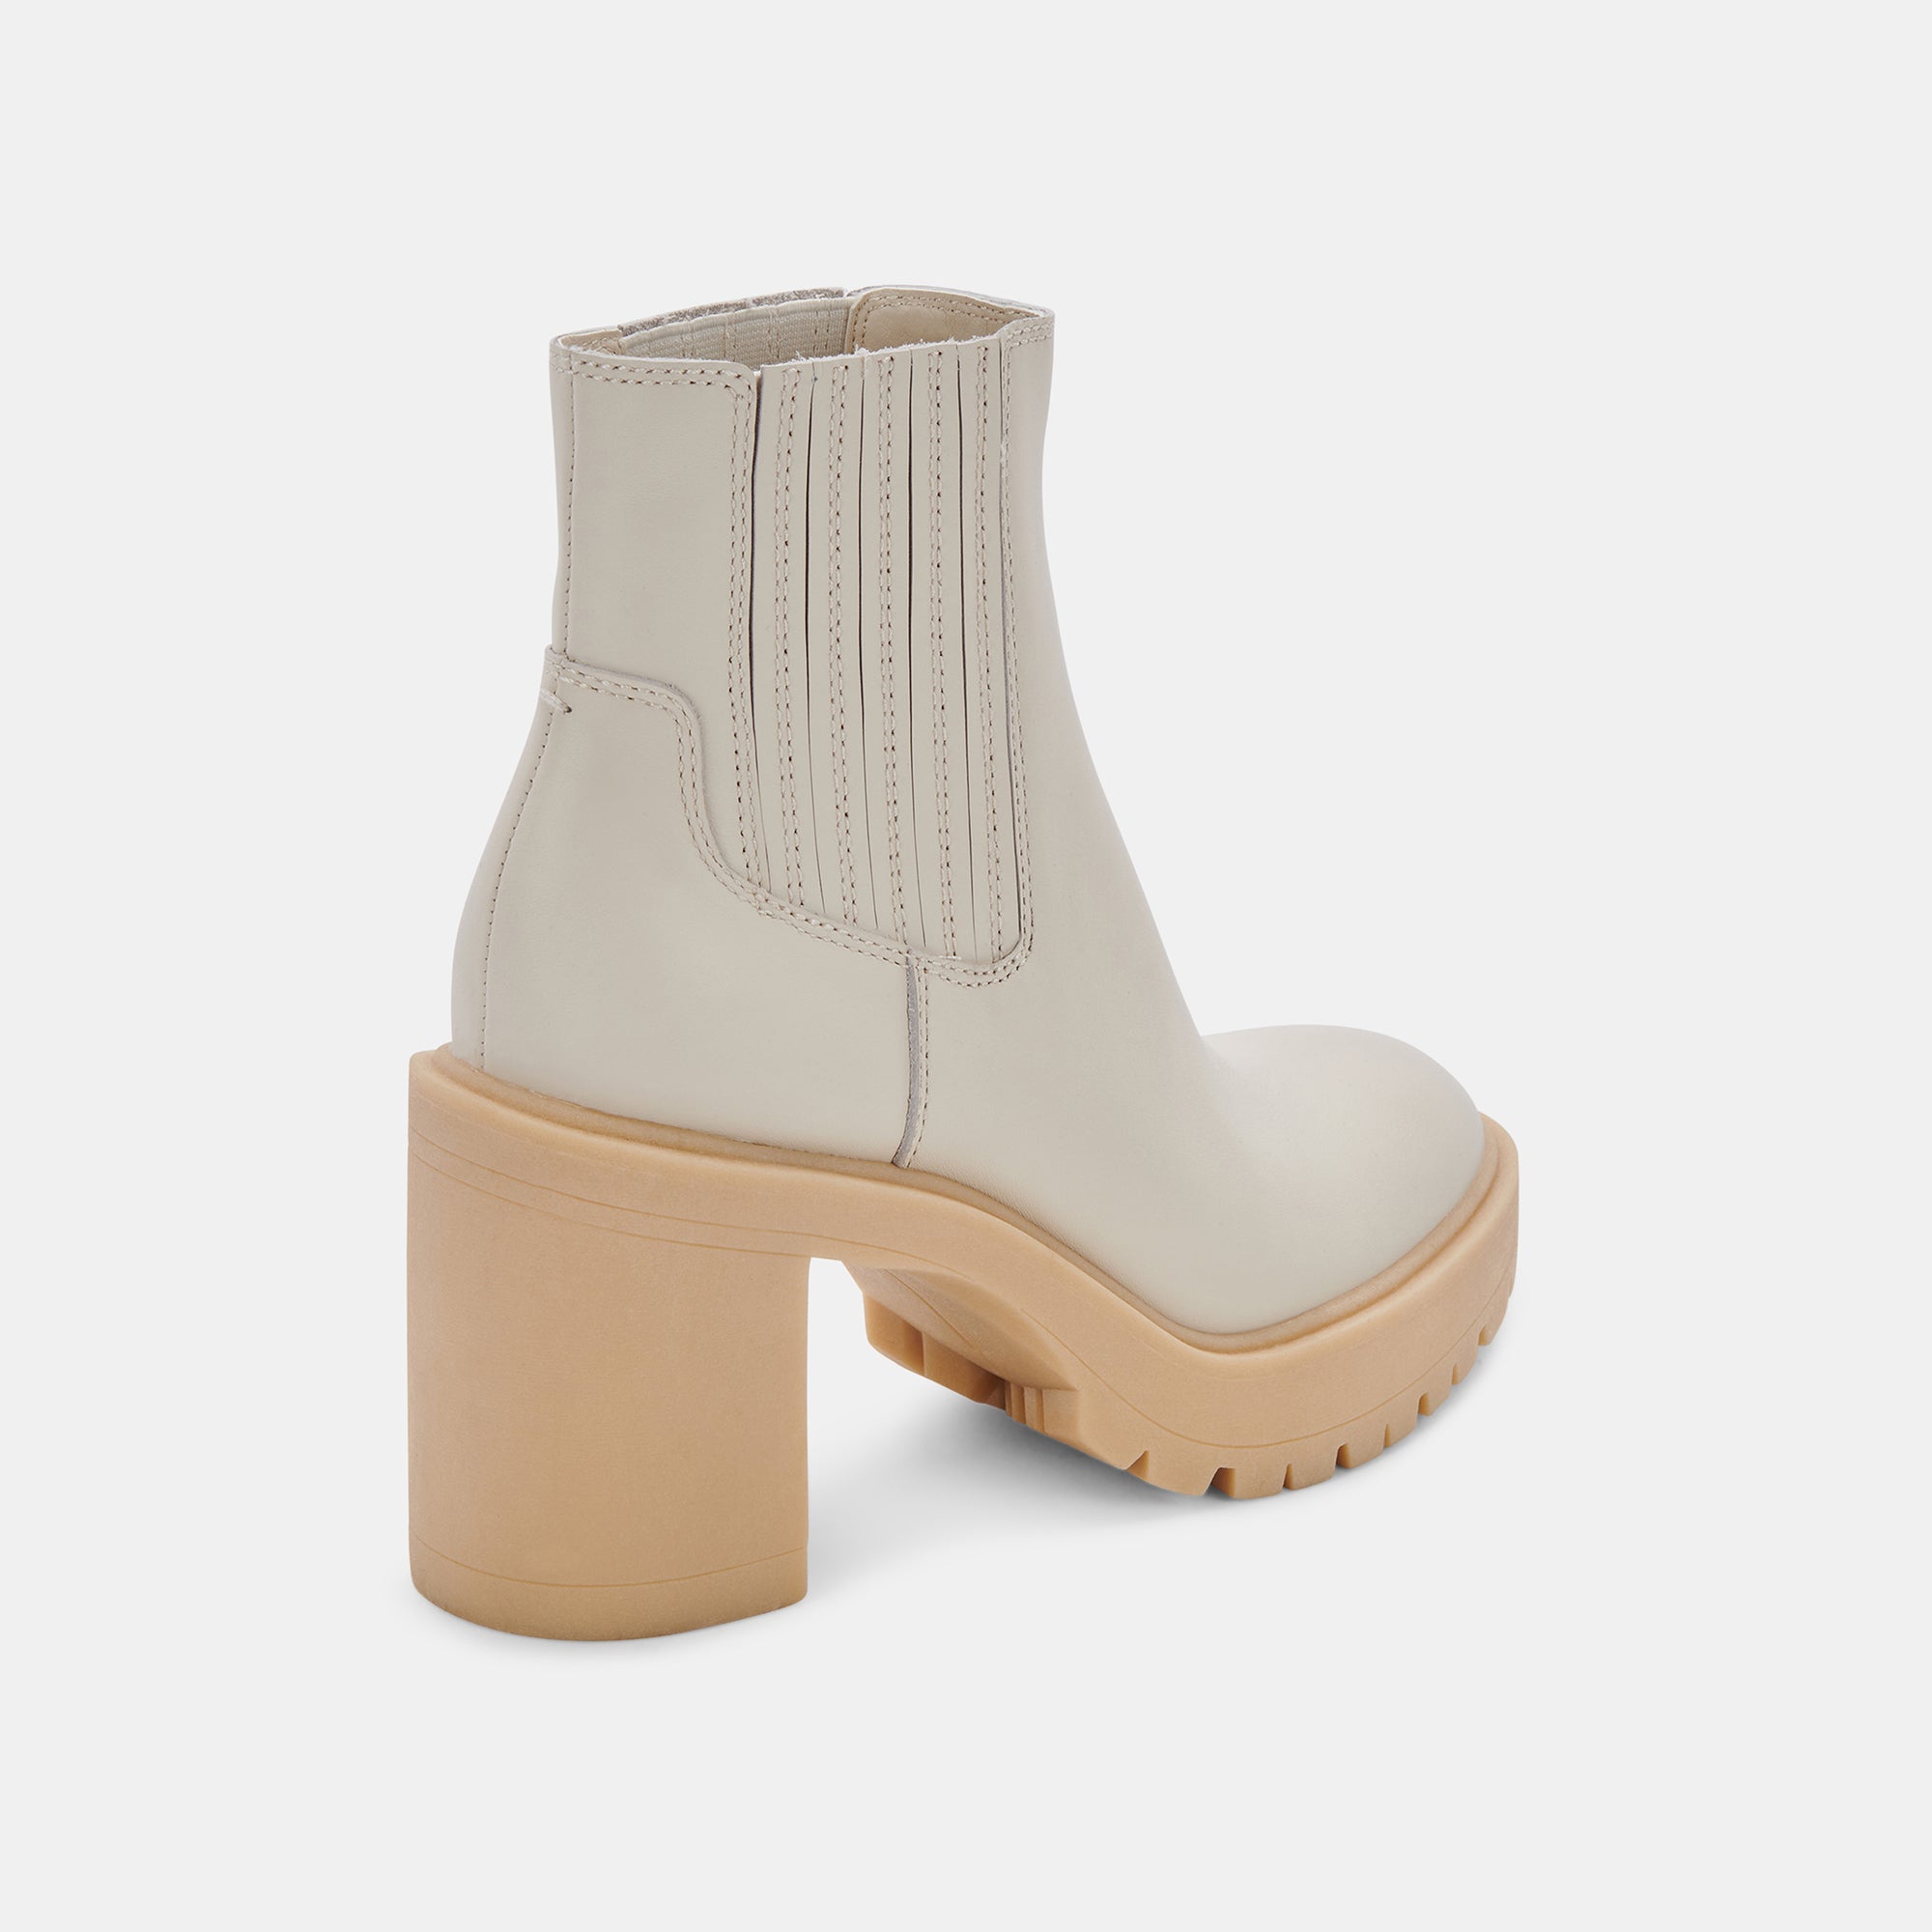 CASTER H2O BOOTIES IVORY LEATHER – Dolce Vita